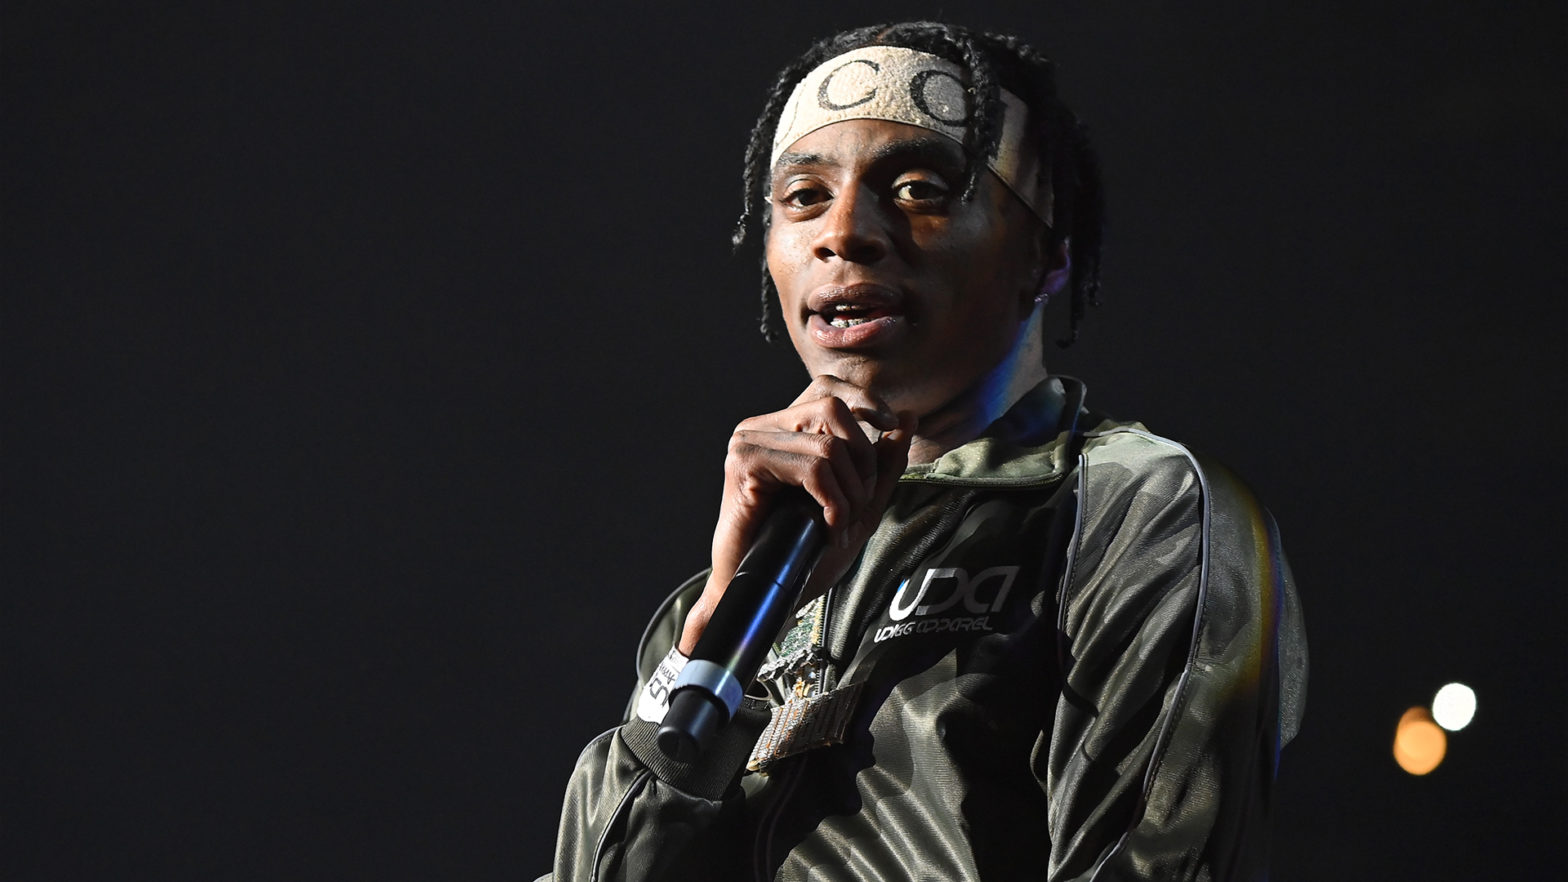 Soulja Boy Announces He Will Create His Own Social Media App After Saying Farewell To Elon Musk's Twitter